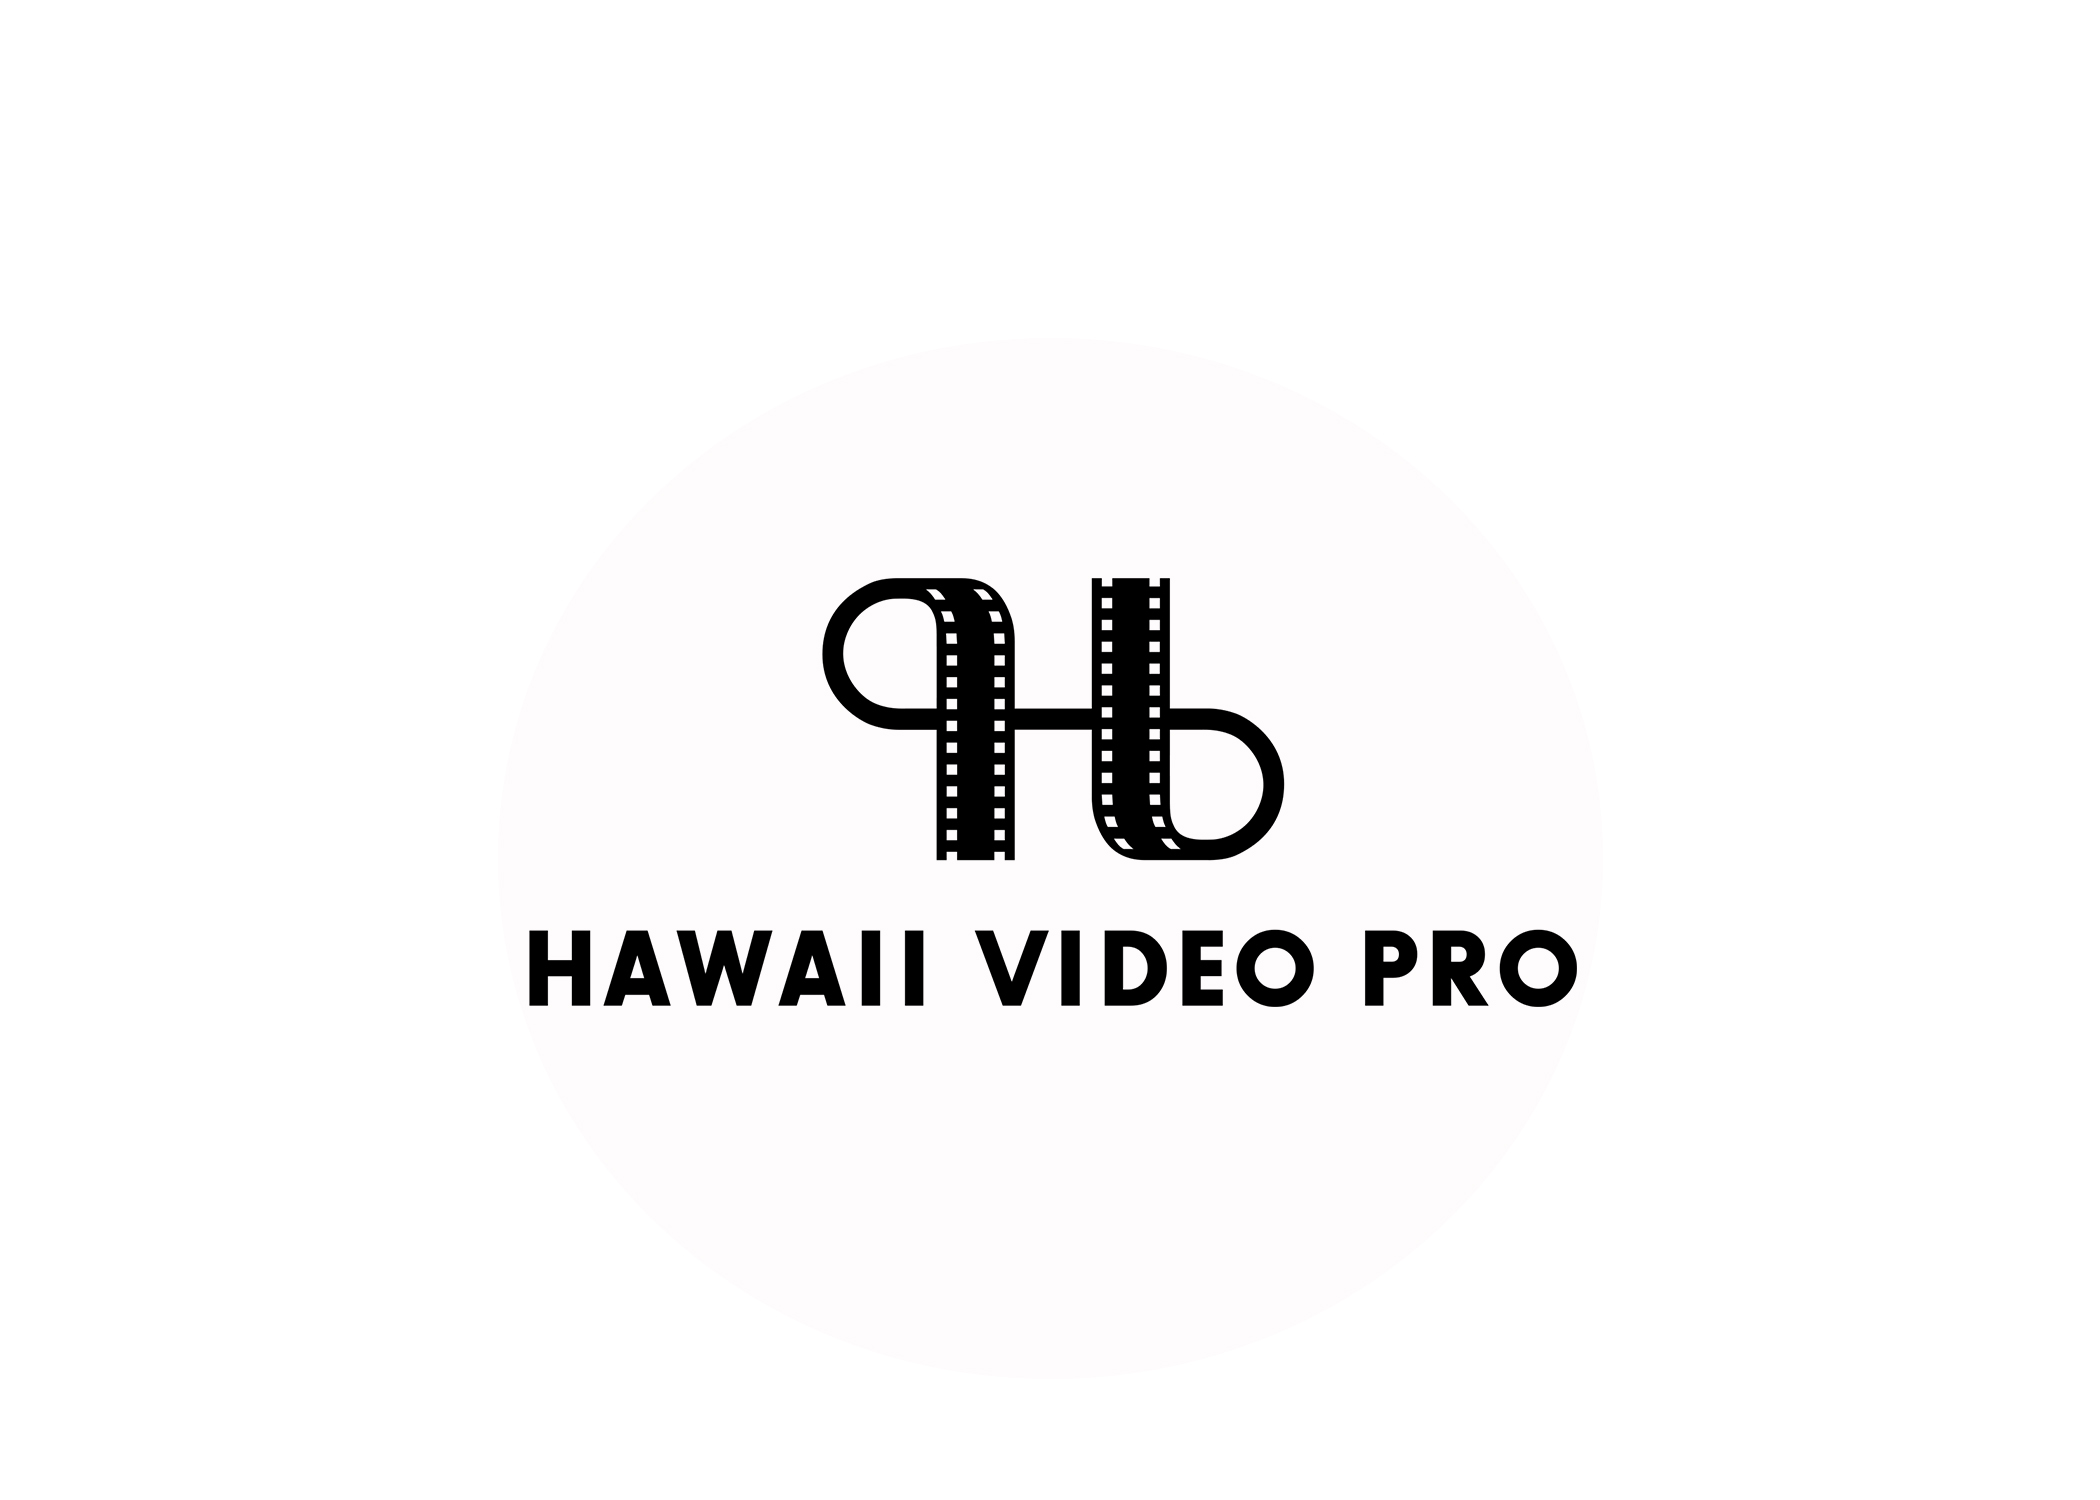  Videographer and Drone videographer with Part 107 Drone certification